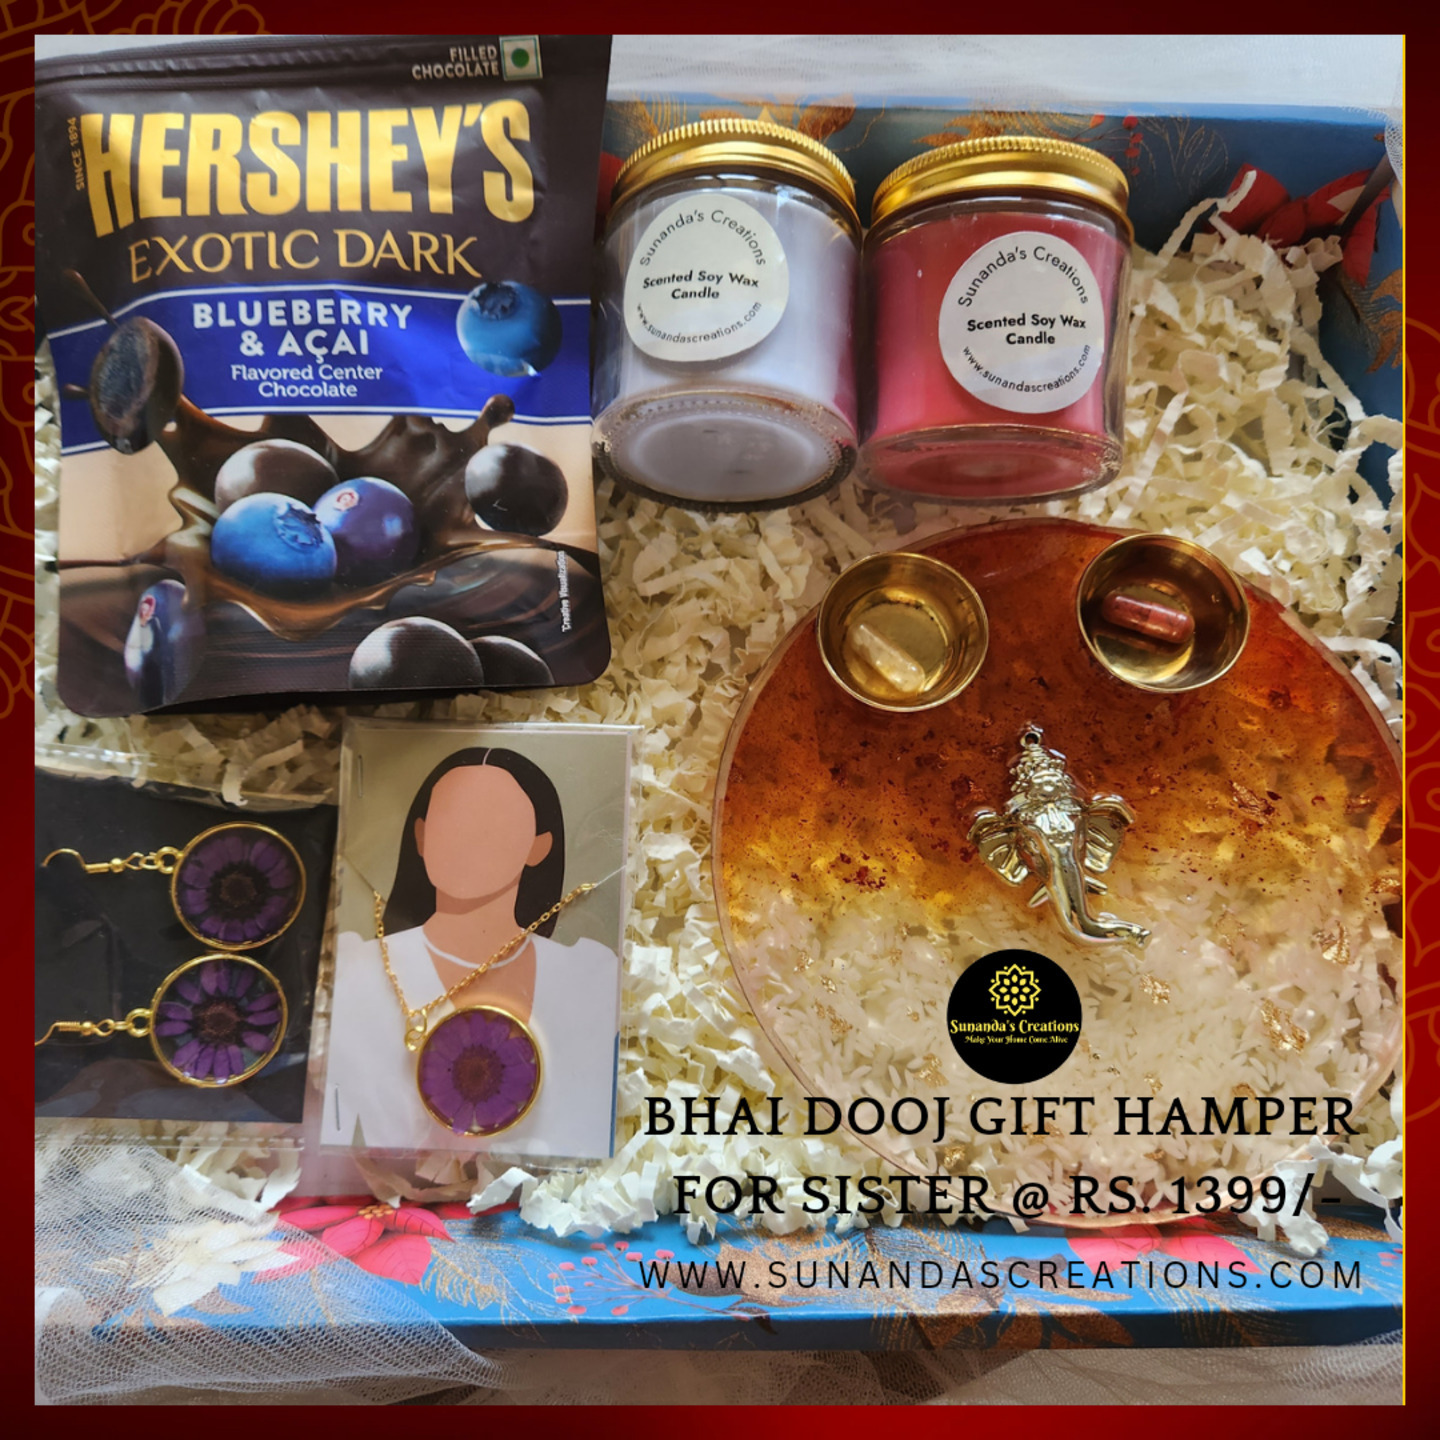 BHAI DOOJ GIFT HAMPER CURATED GIFT FOR SISTER  HANDMADE WITH LIVE